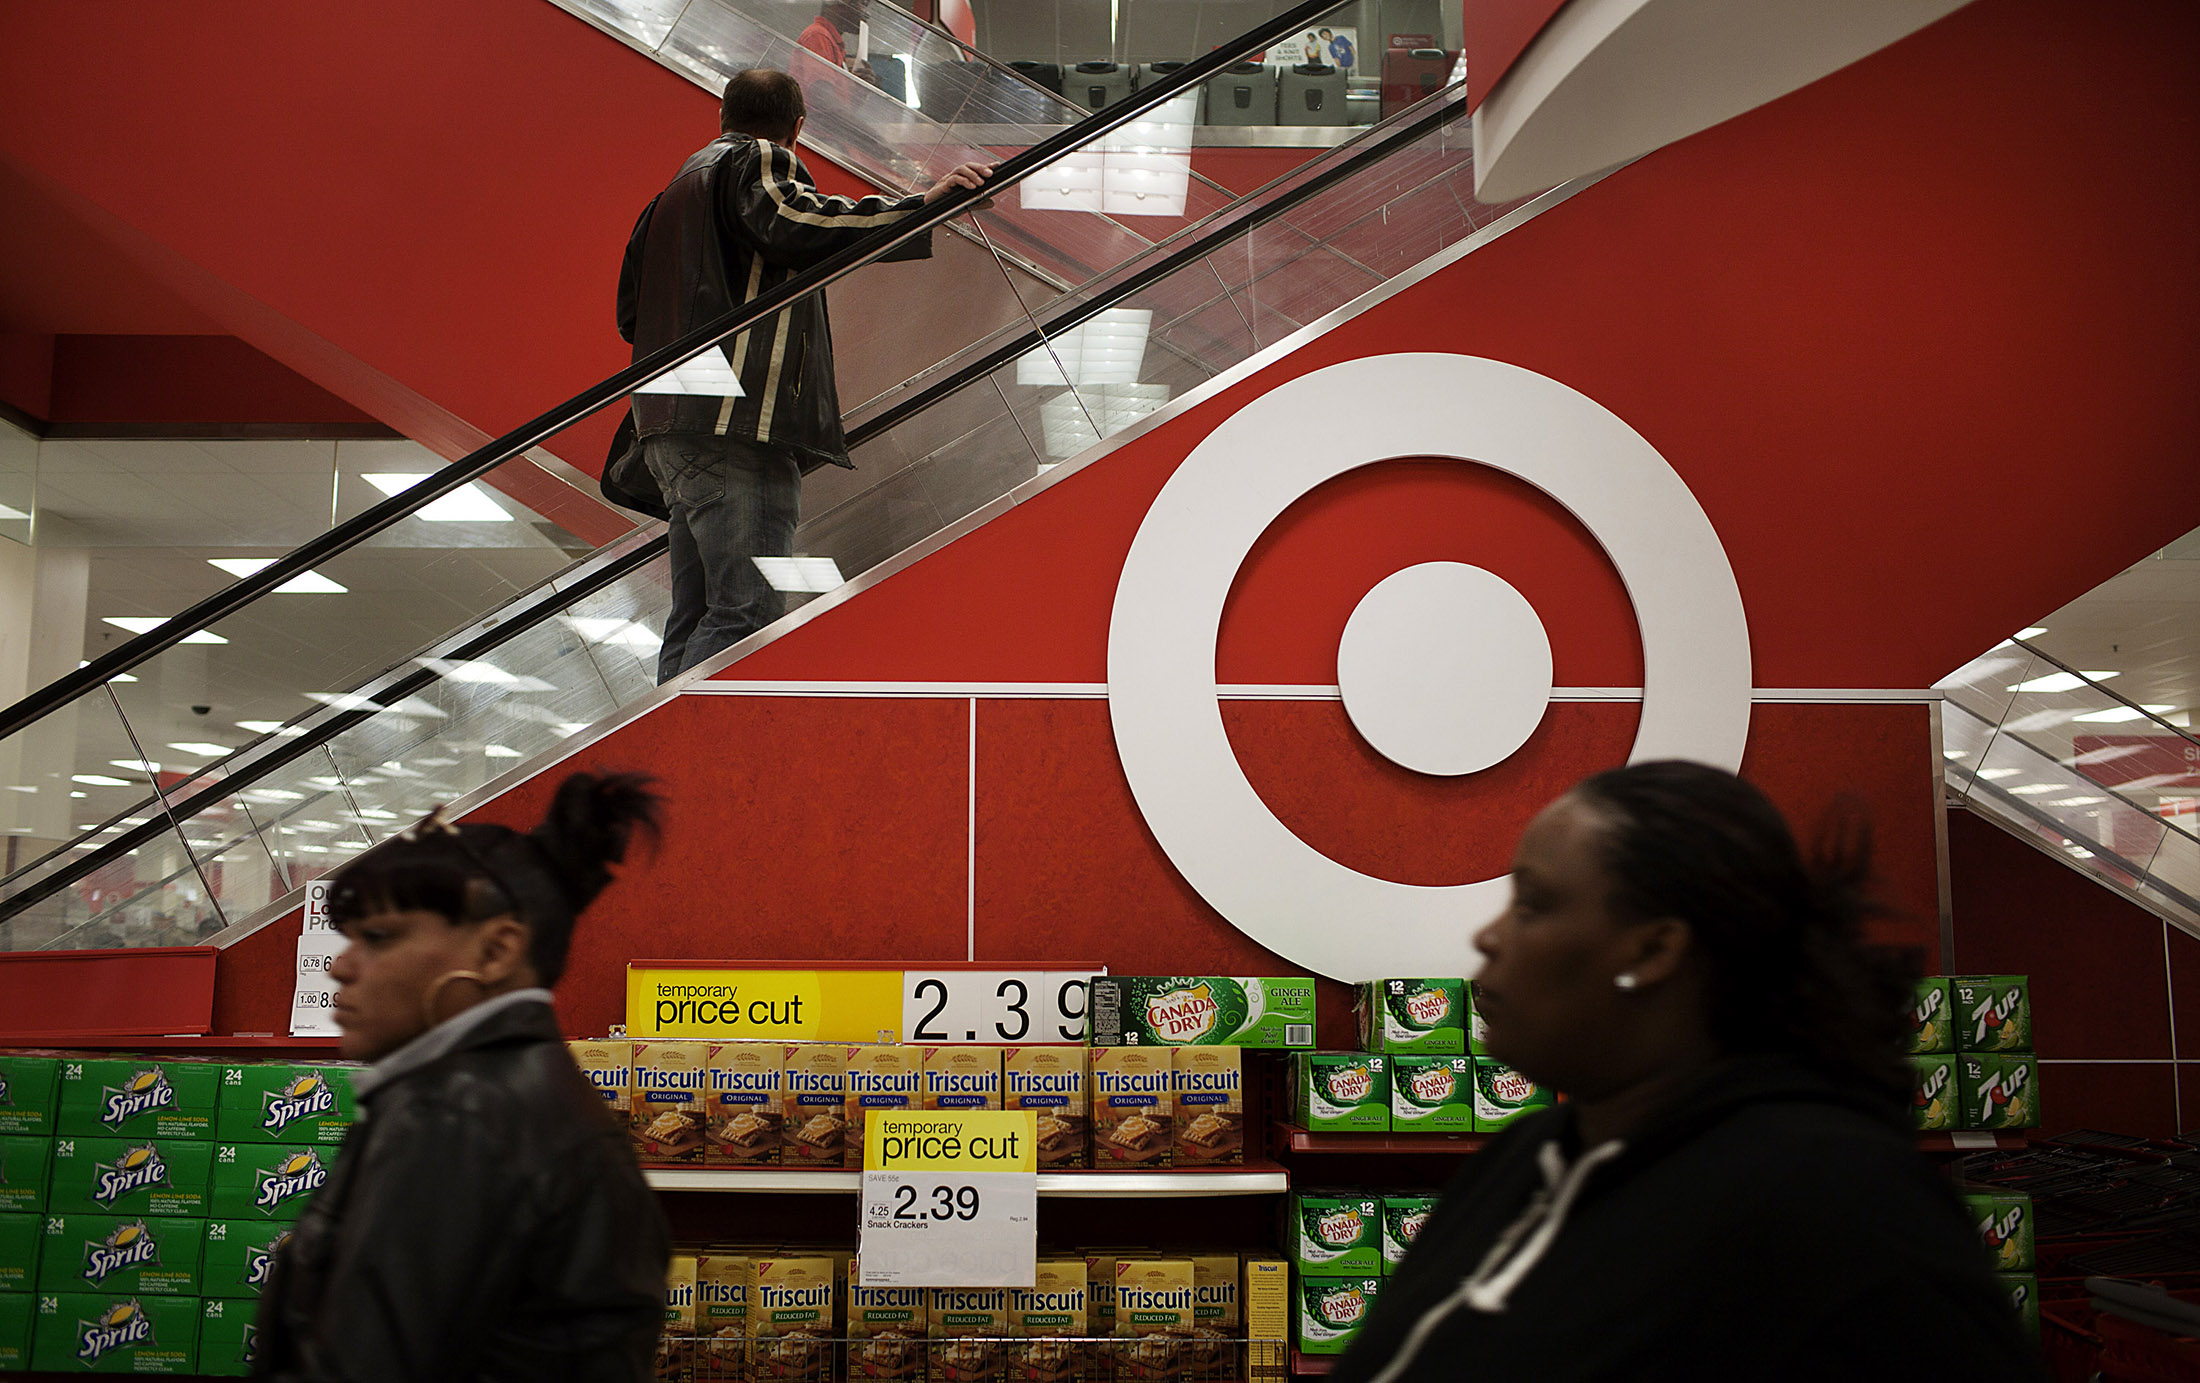 Shoppers in a Target Corp. store.
